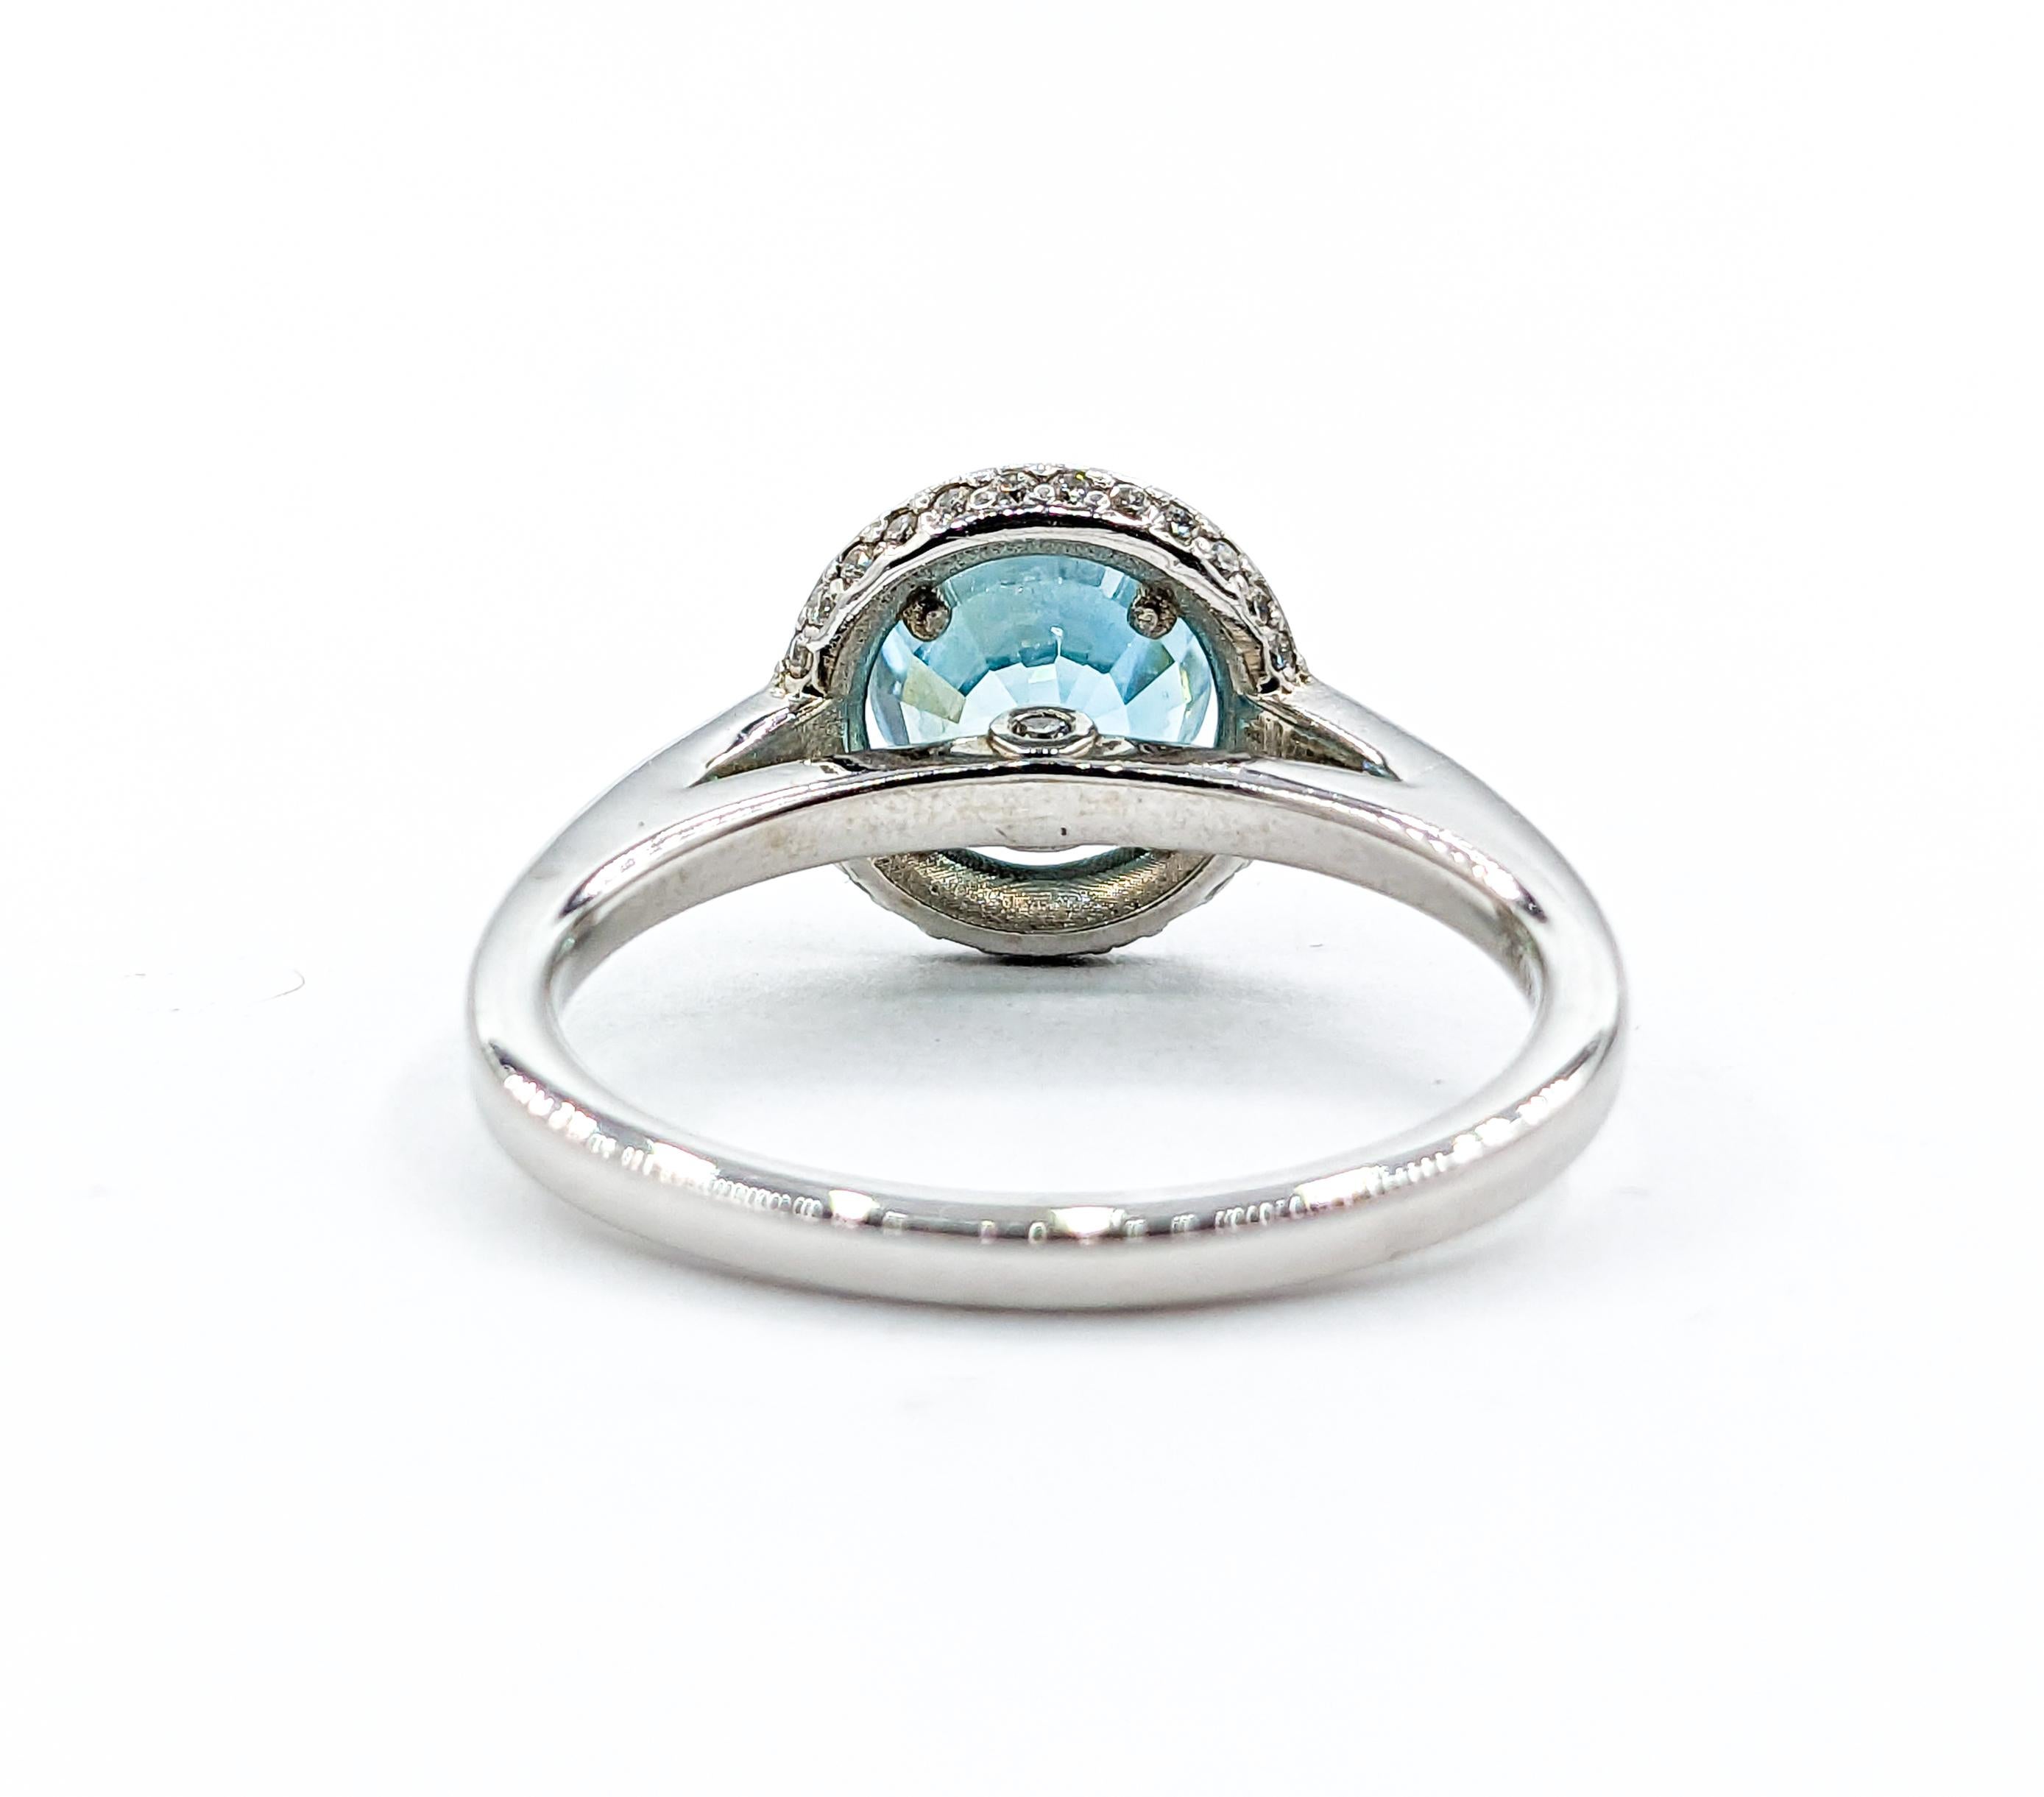 2.51ct Blue Zircon & Diamond Halo Ring In White Gold In Excellent Condition For Sale In Bloomington, MN